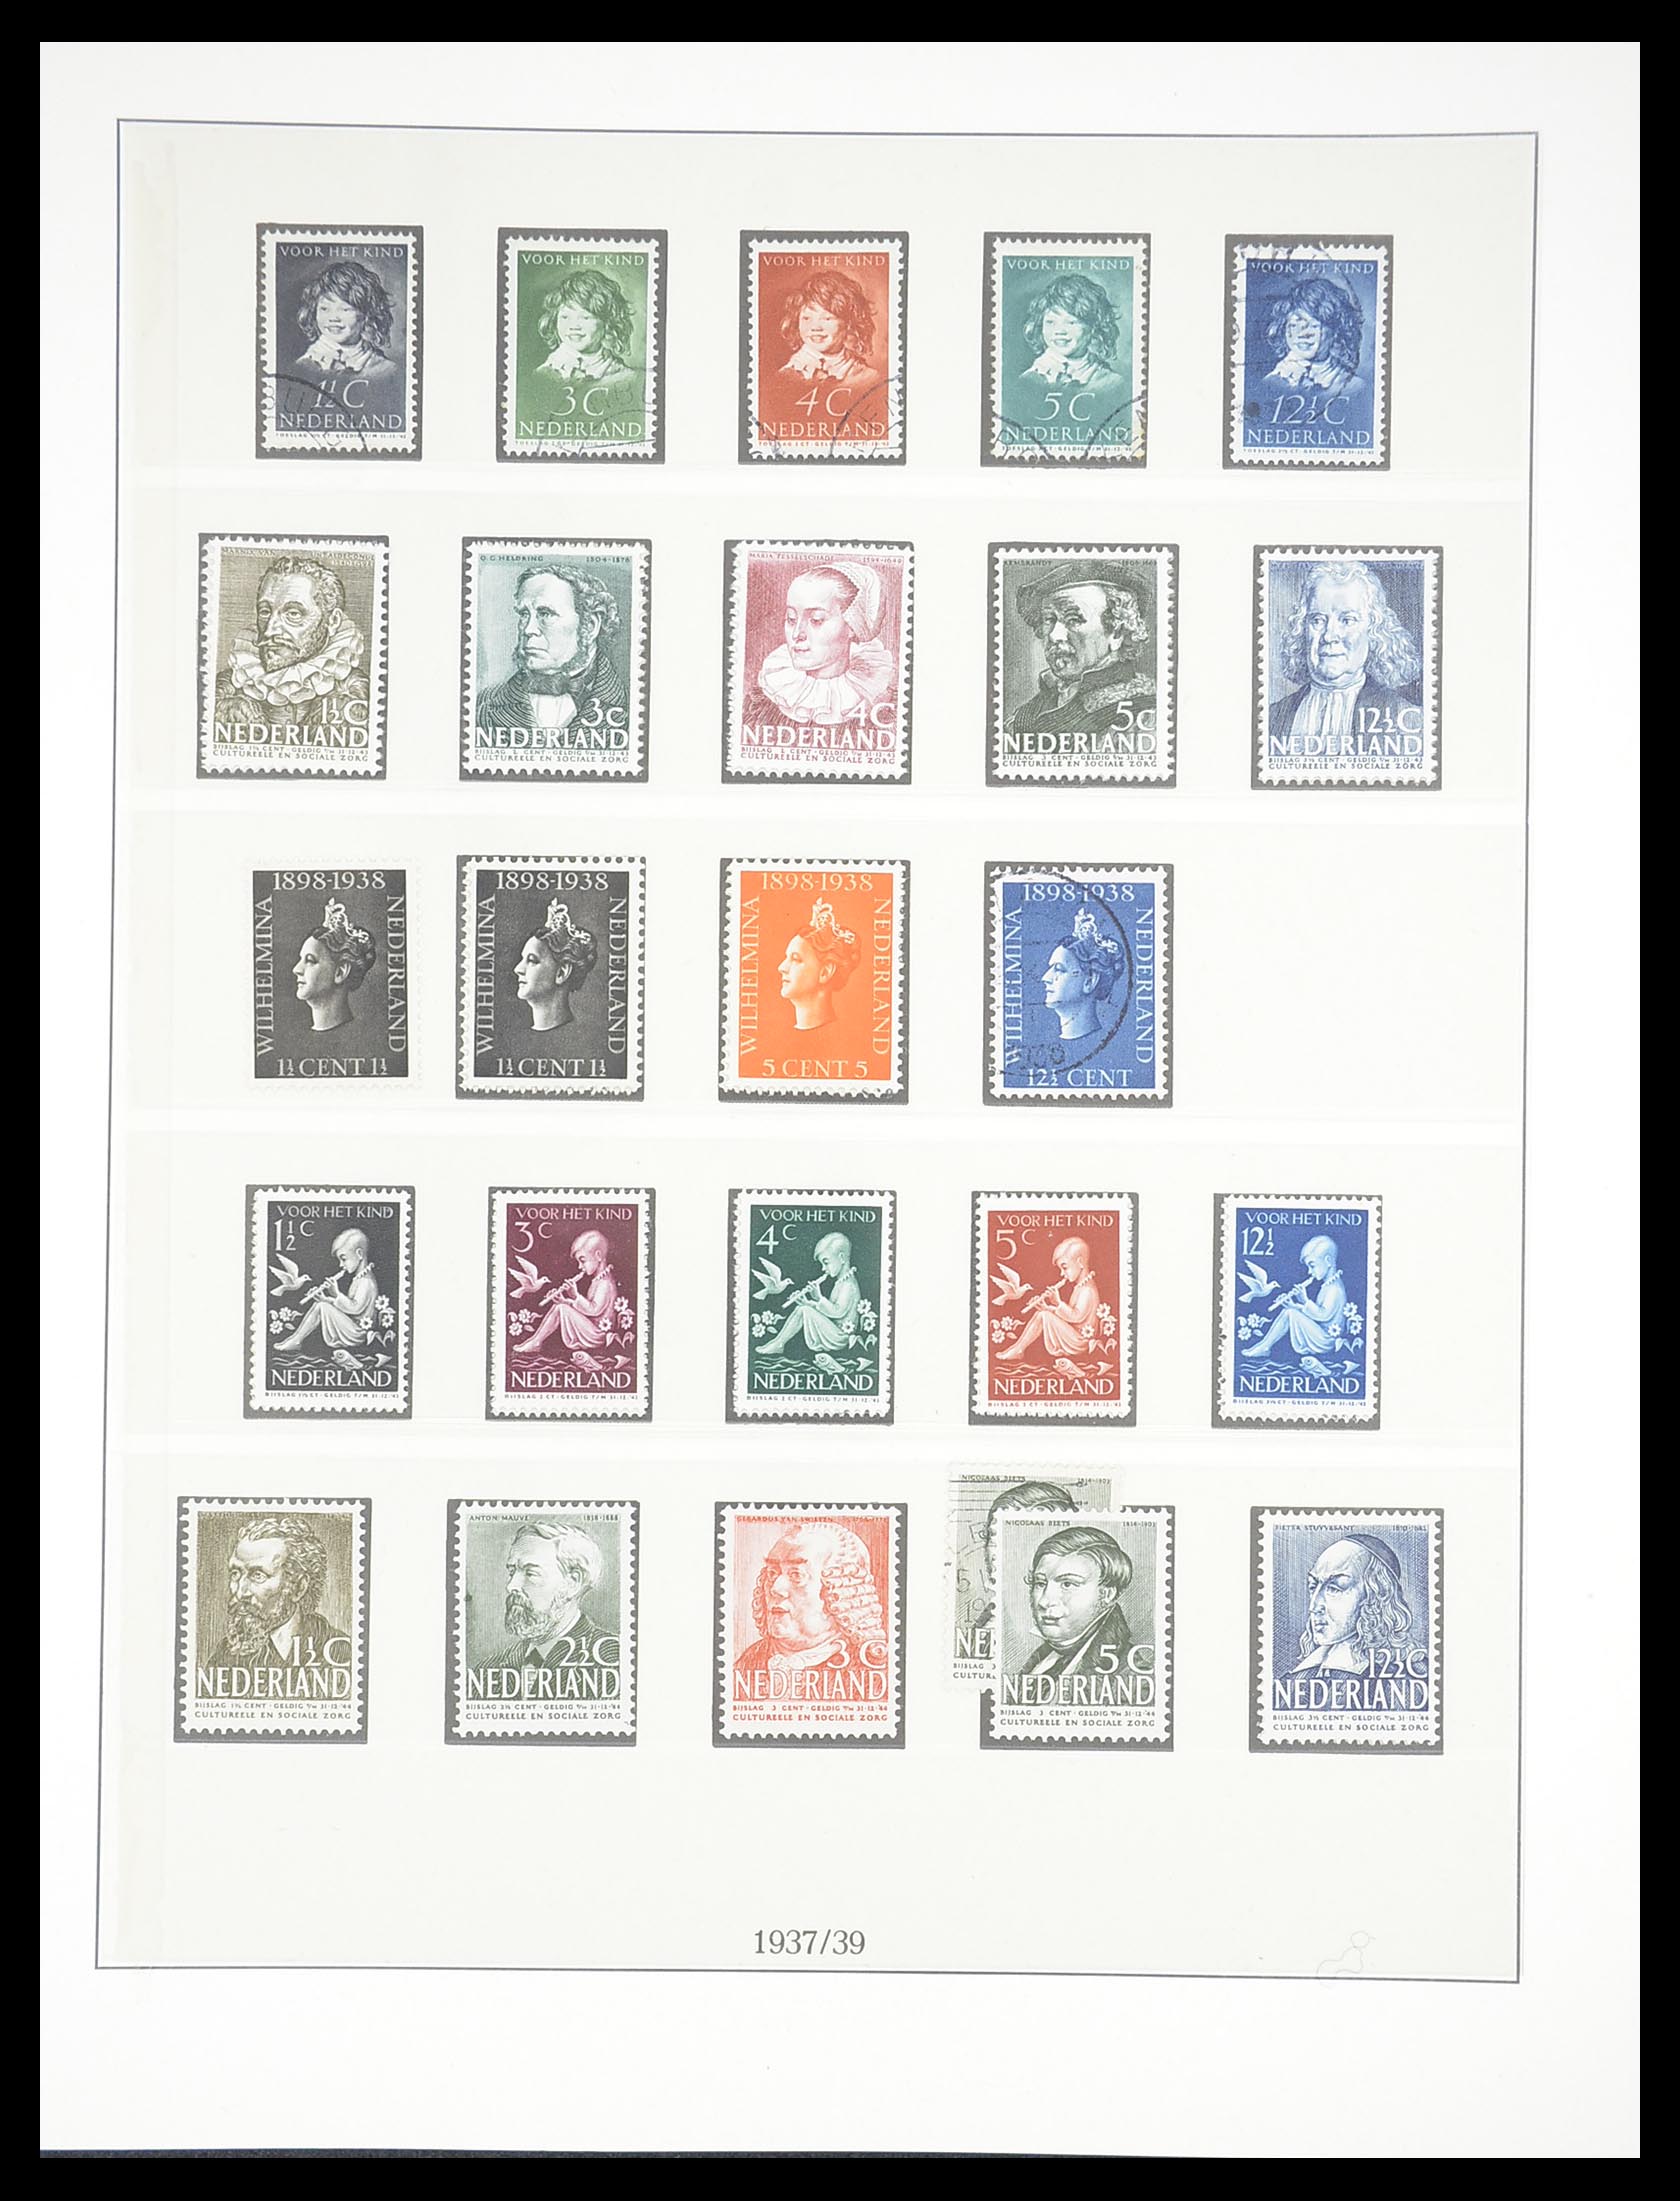 33189 032 - Stamp collection 33189 European countries 1850-1950.